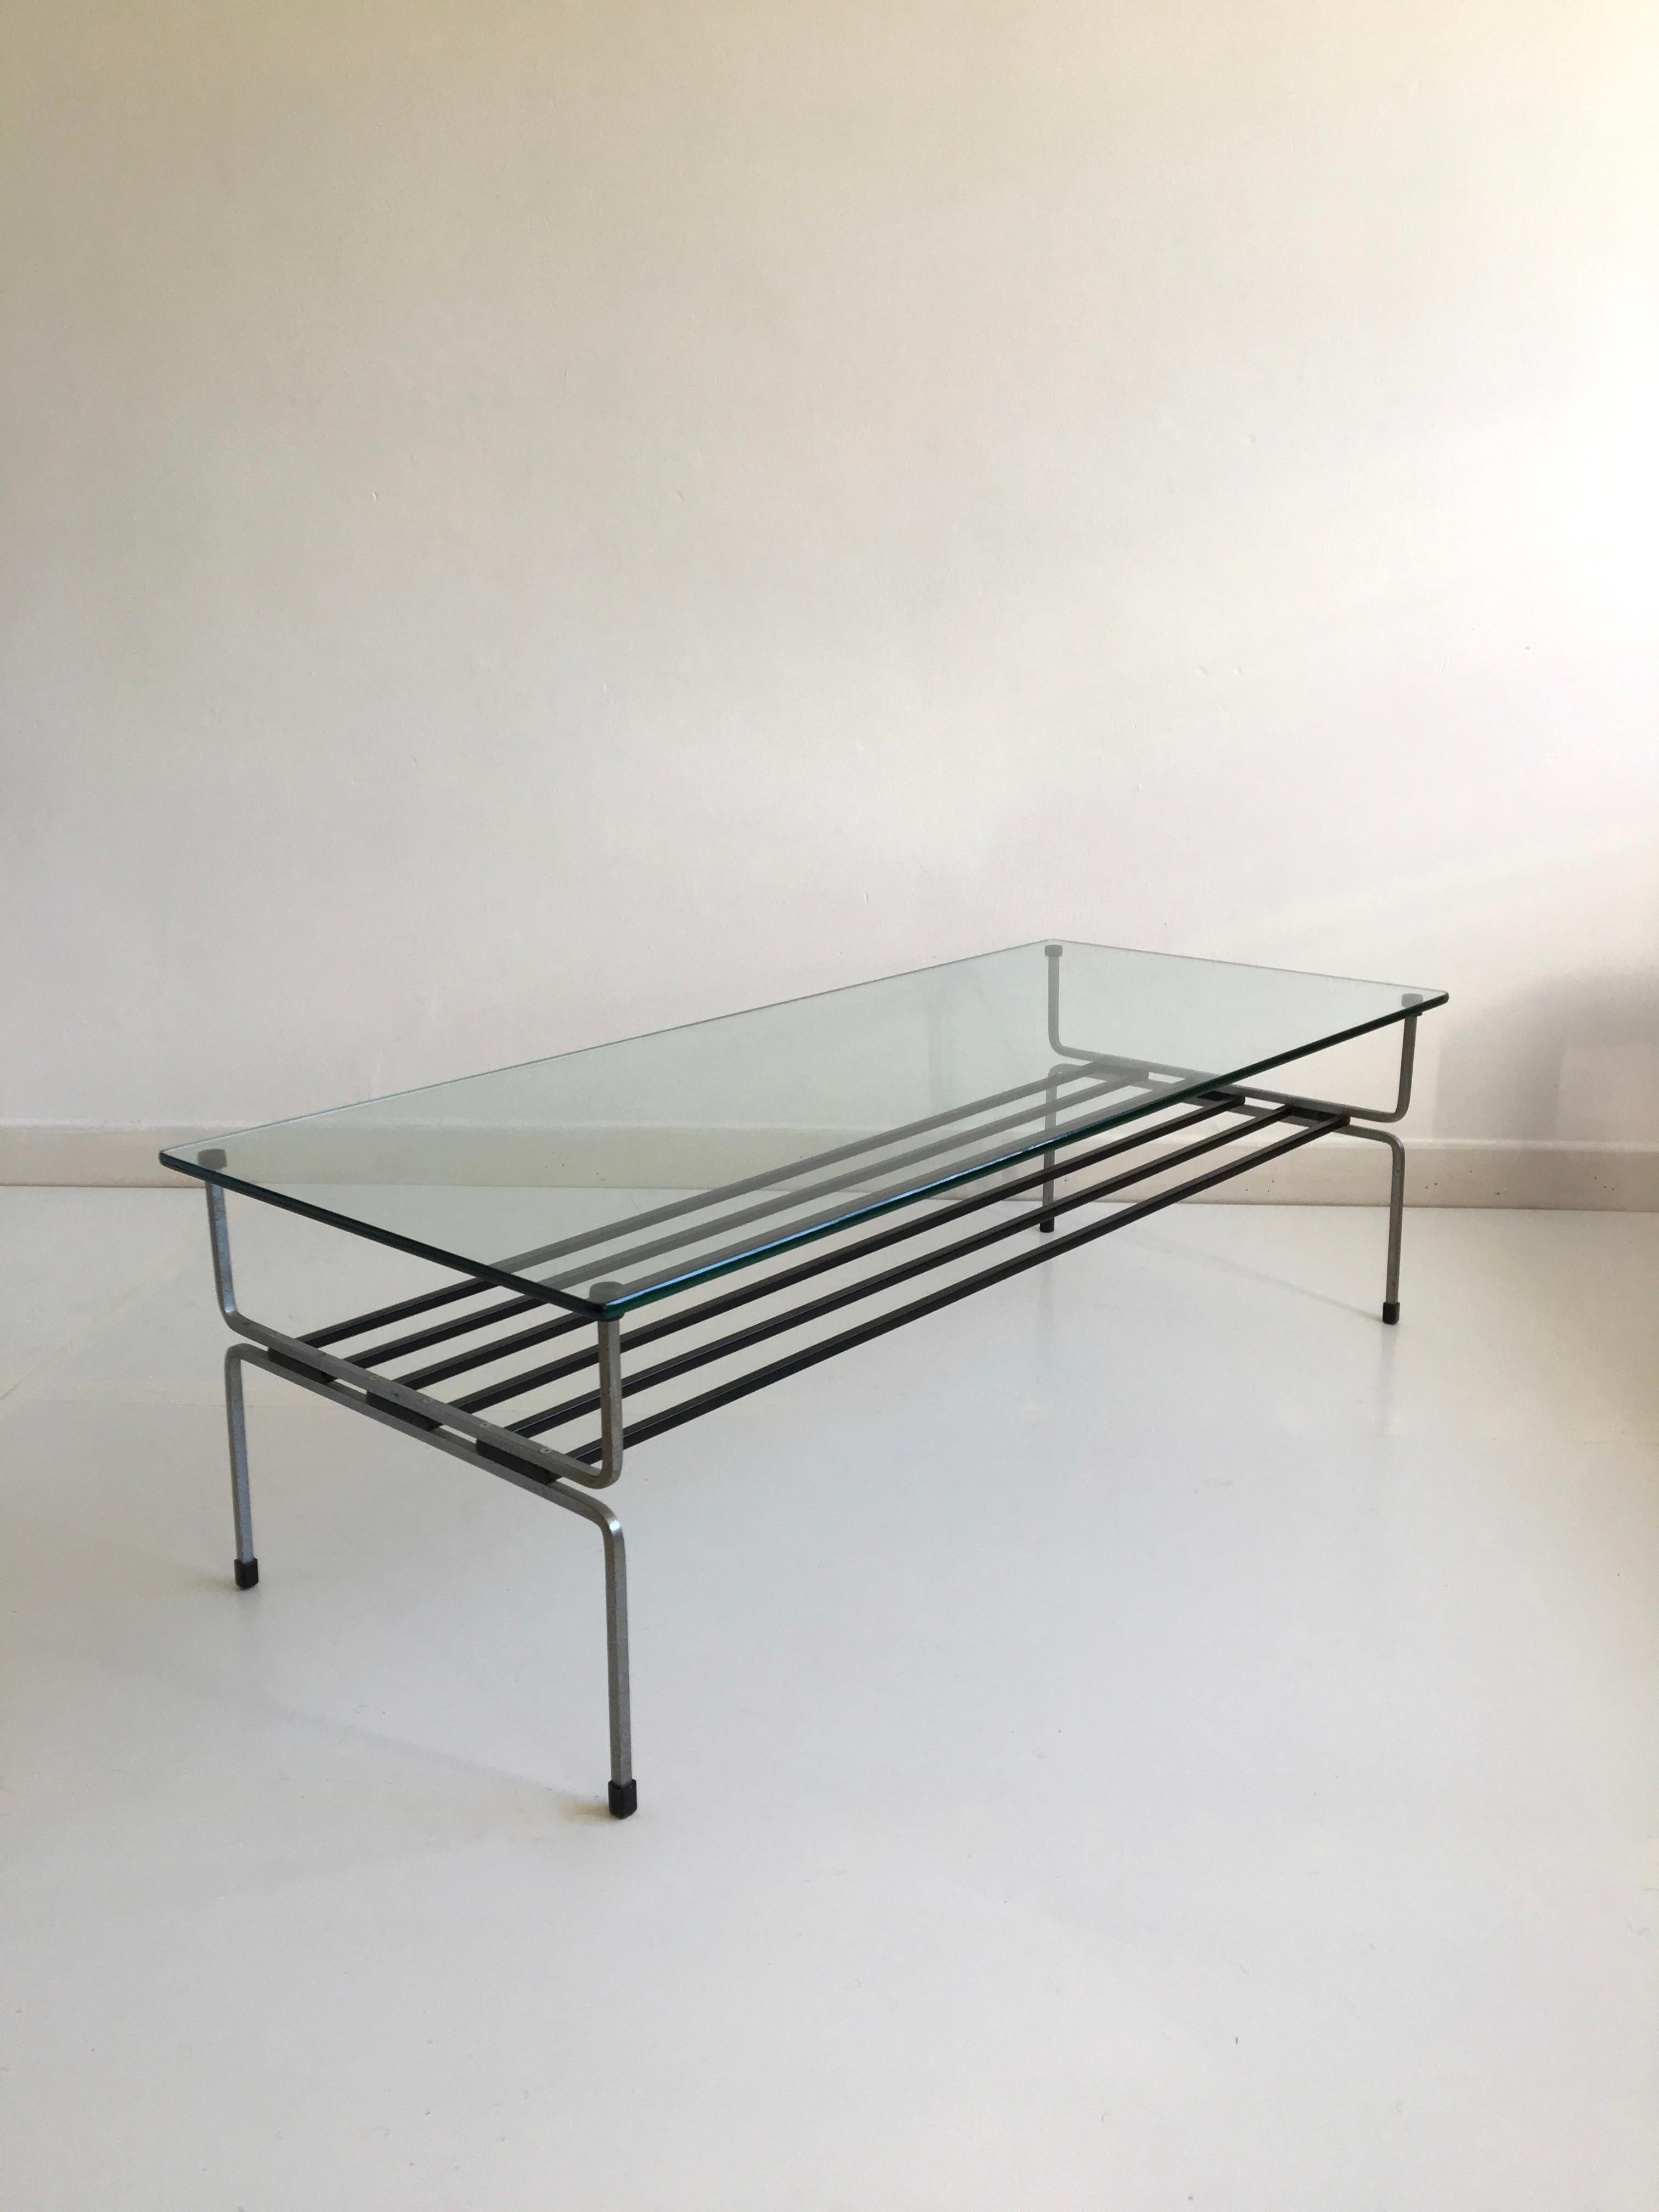 Mid-Century Modern Midcentury Glass and Steel Coffee Table by William Plunkett, England, circa 1960